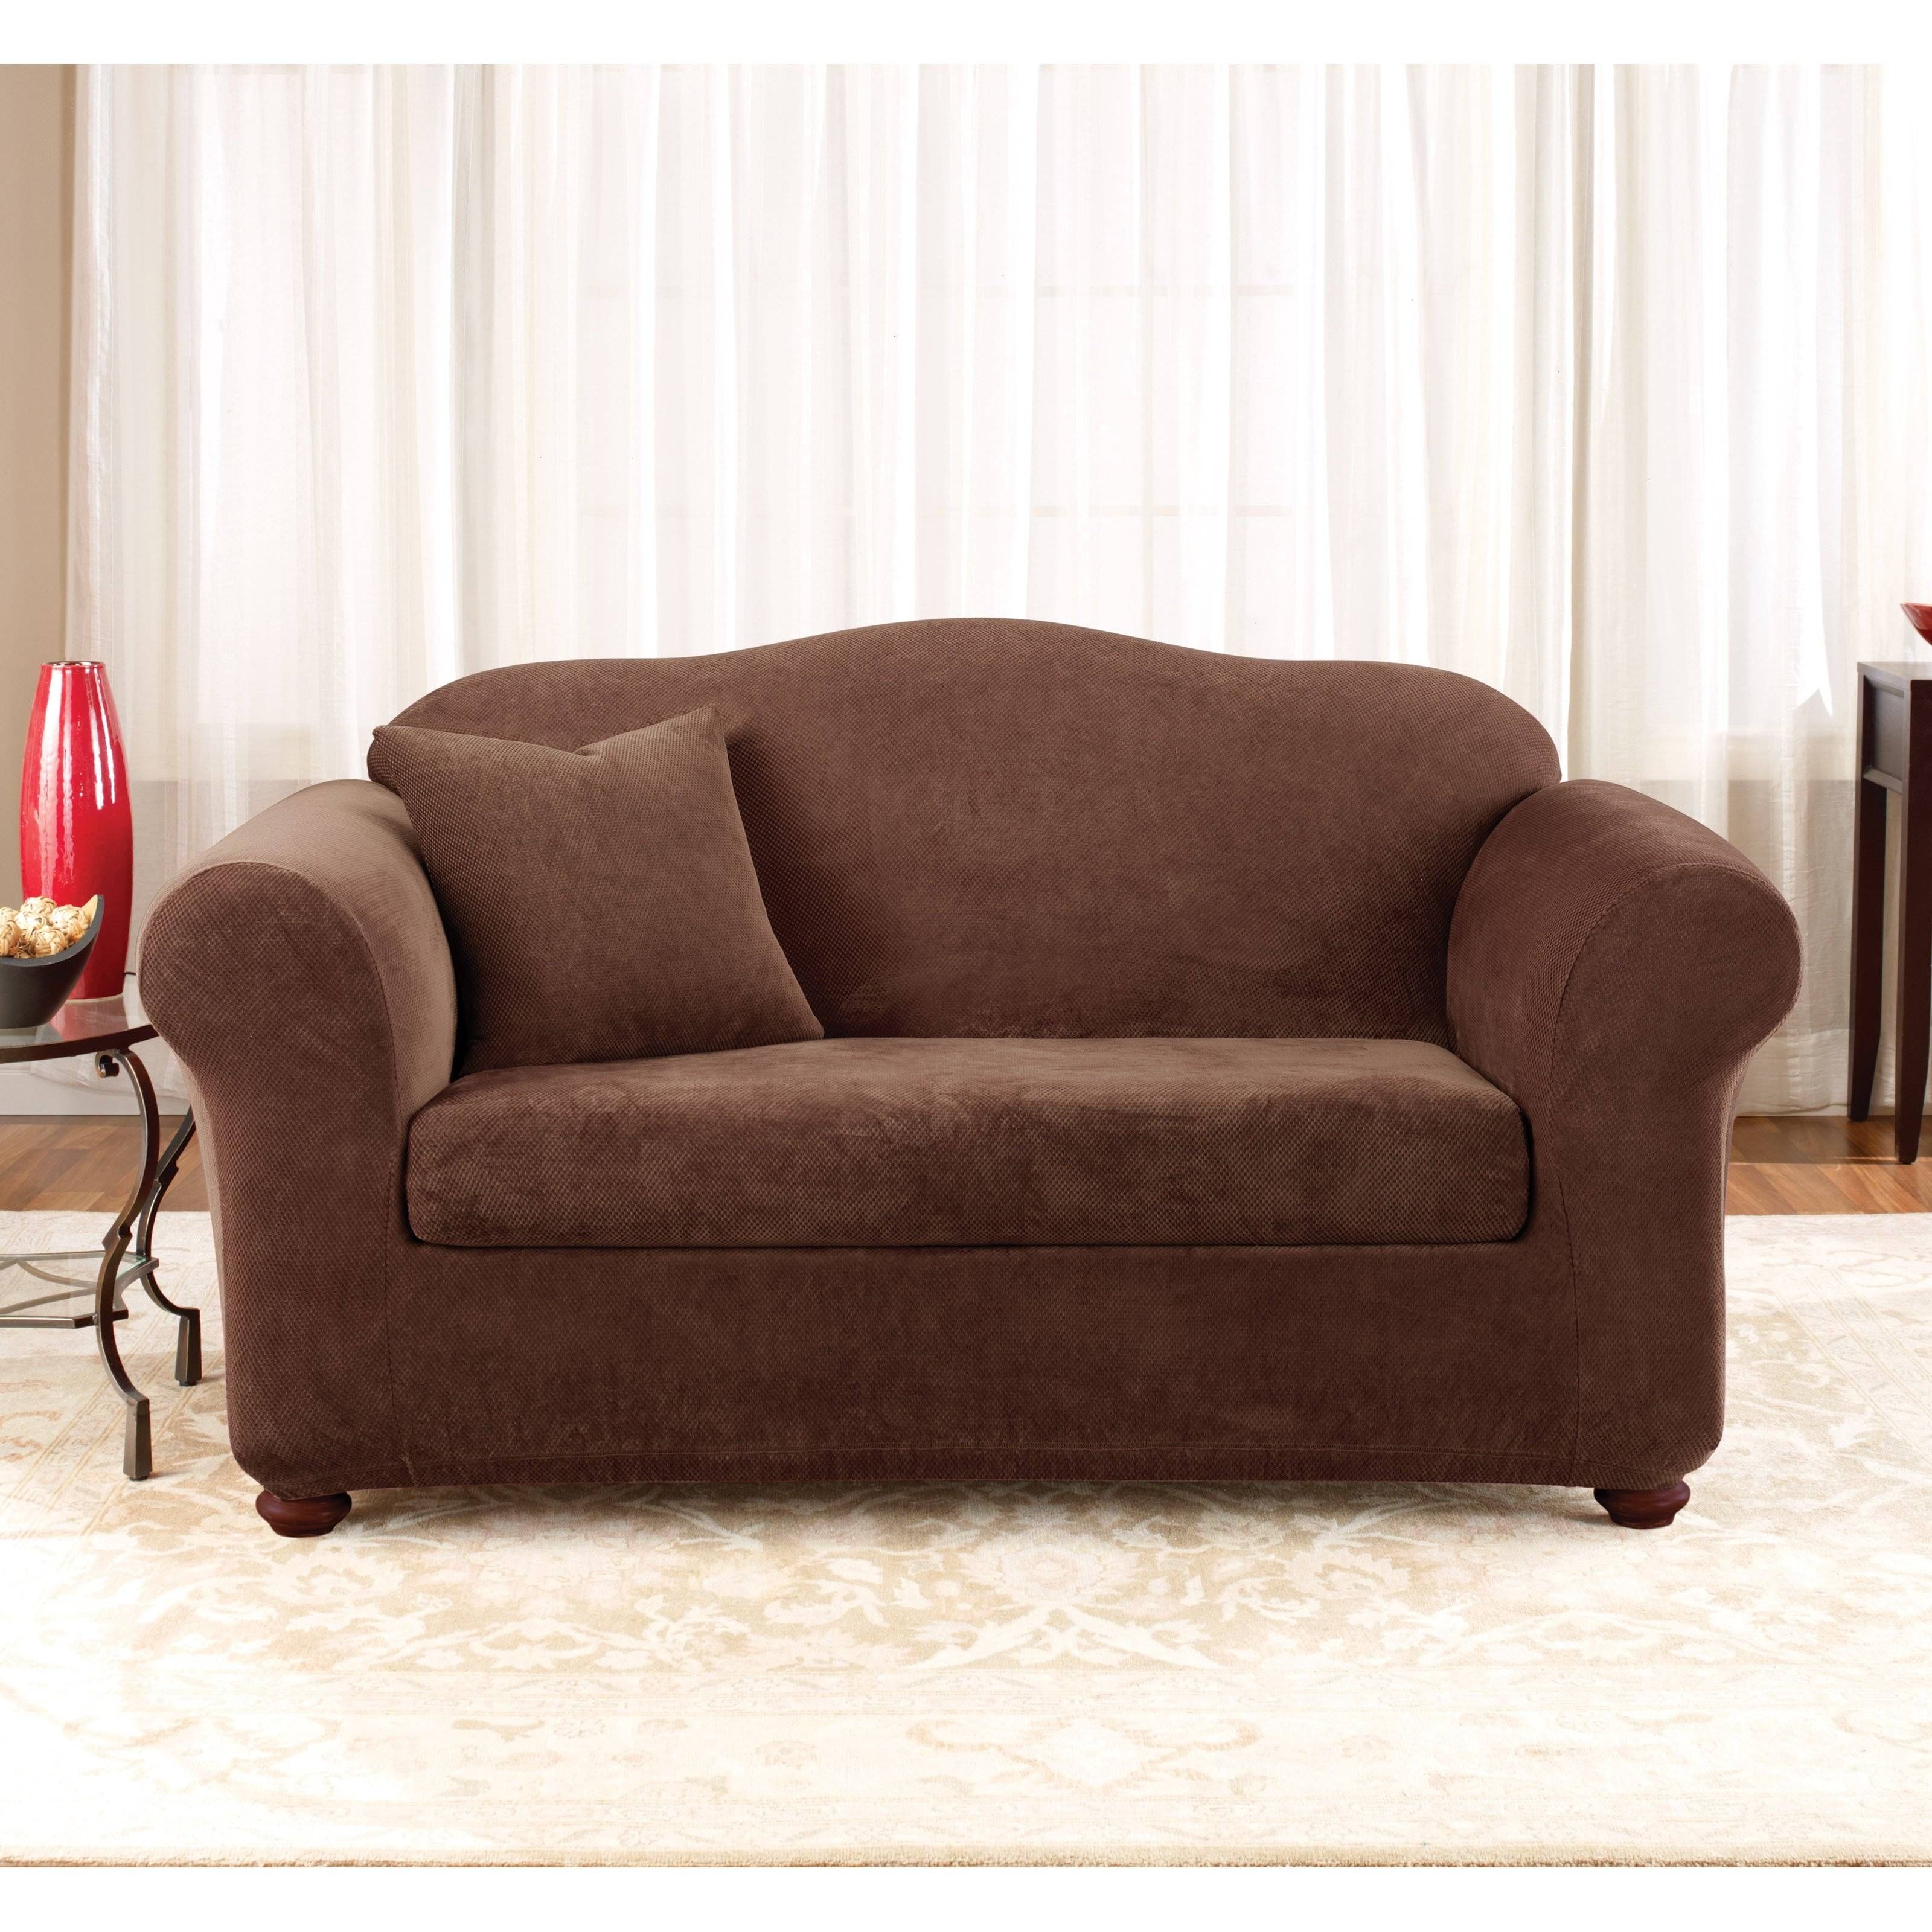 Sofa And Loveseat Covers | Tehranmix Decoration Pertaining To Sofa Loveseat Slipcovers (View 3 of 30)